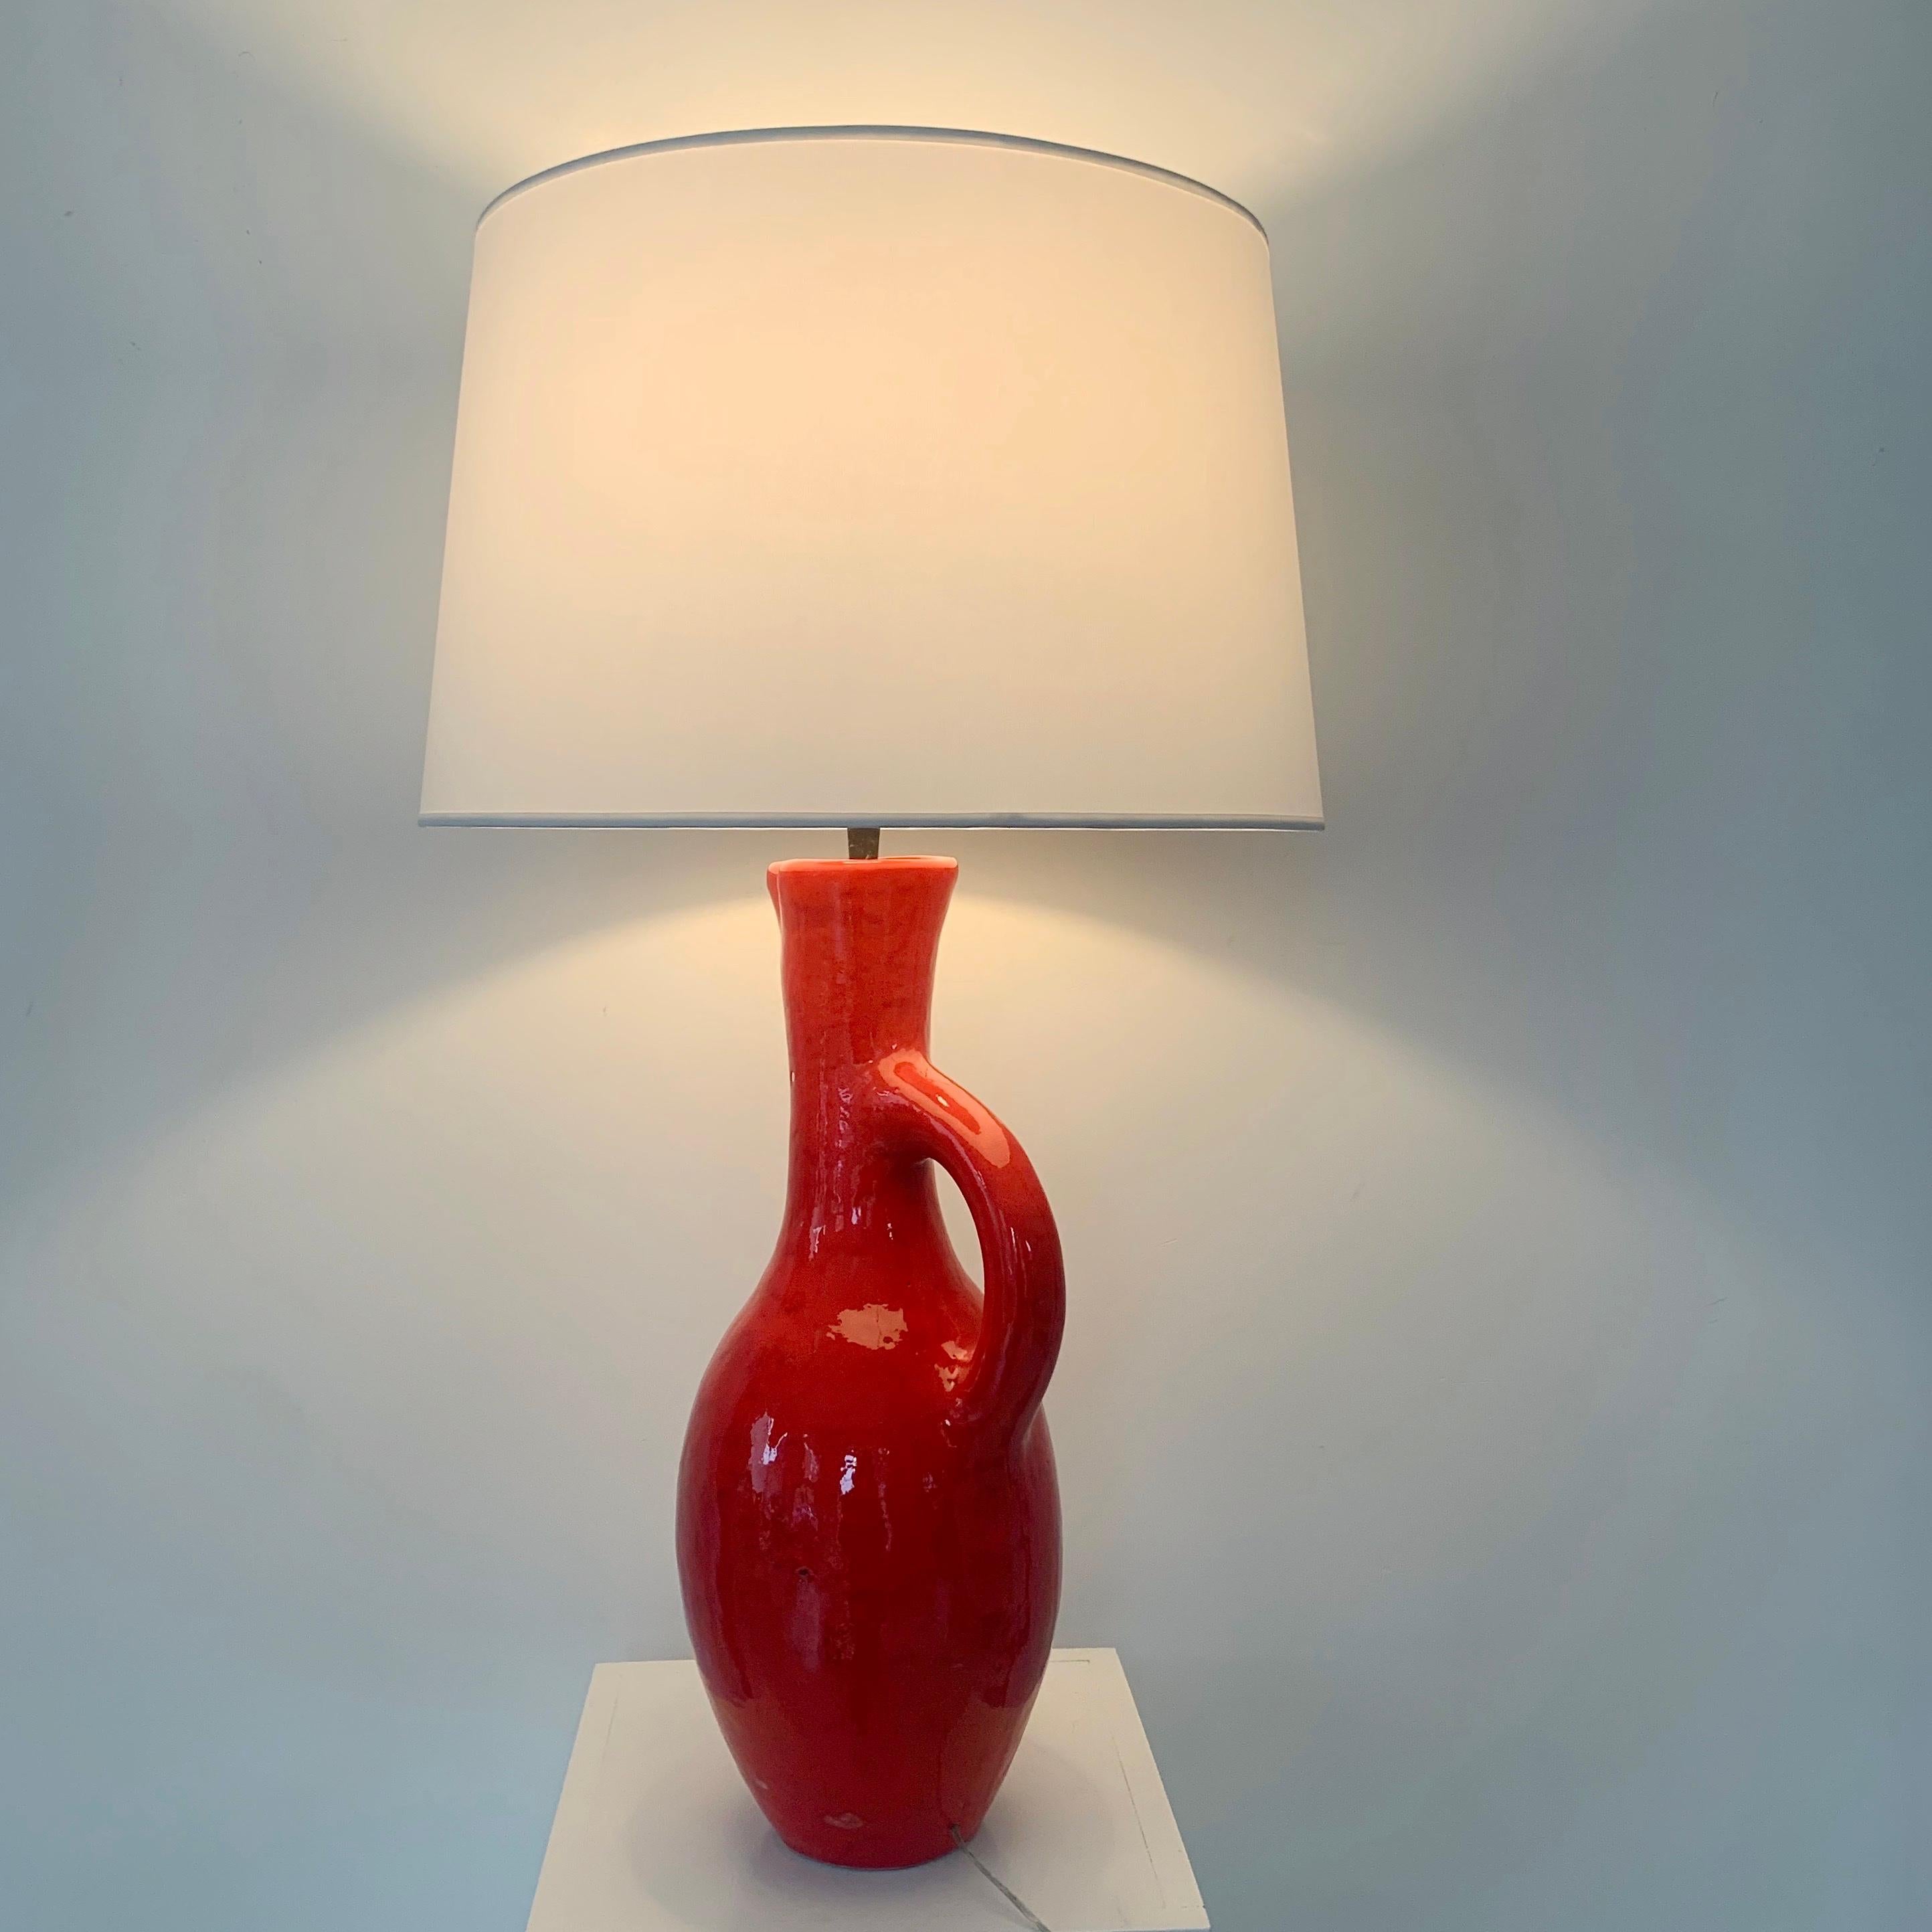 Les Archanges/Gilbert Valentin Large Signed Table Lamp, 1950s, Vallauris. 3